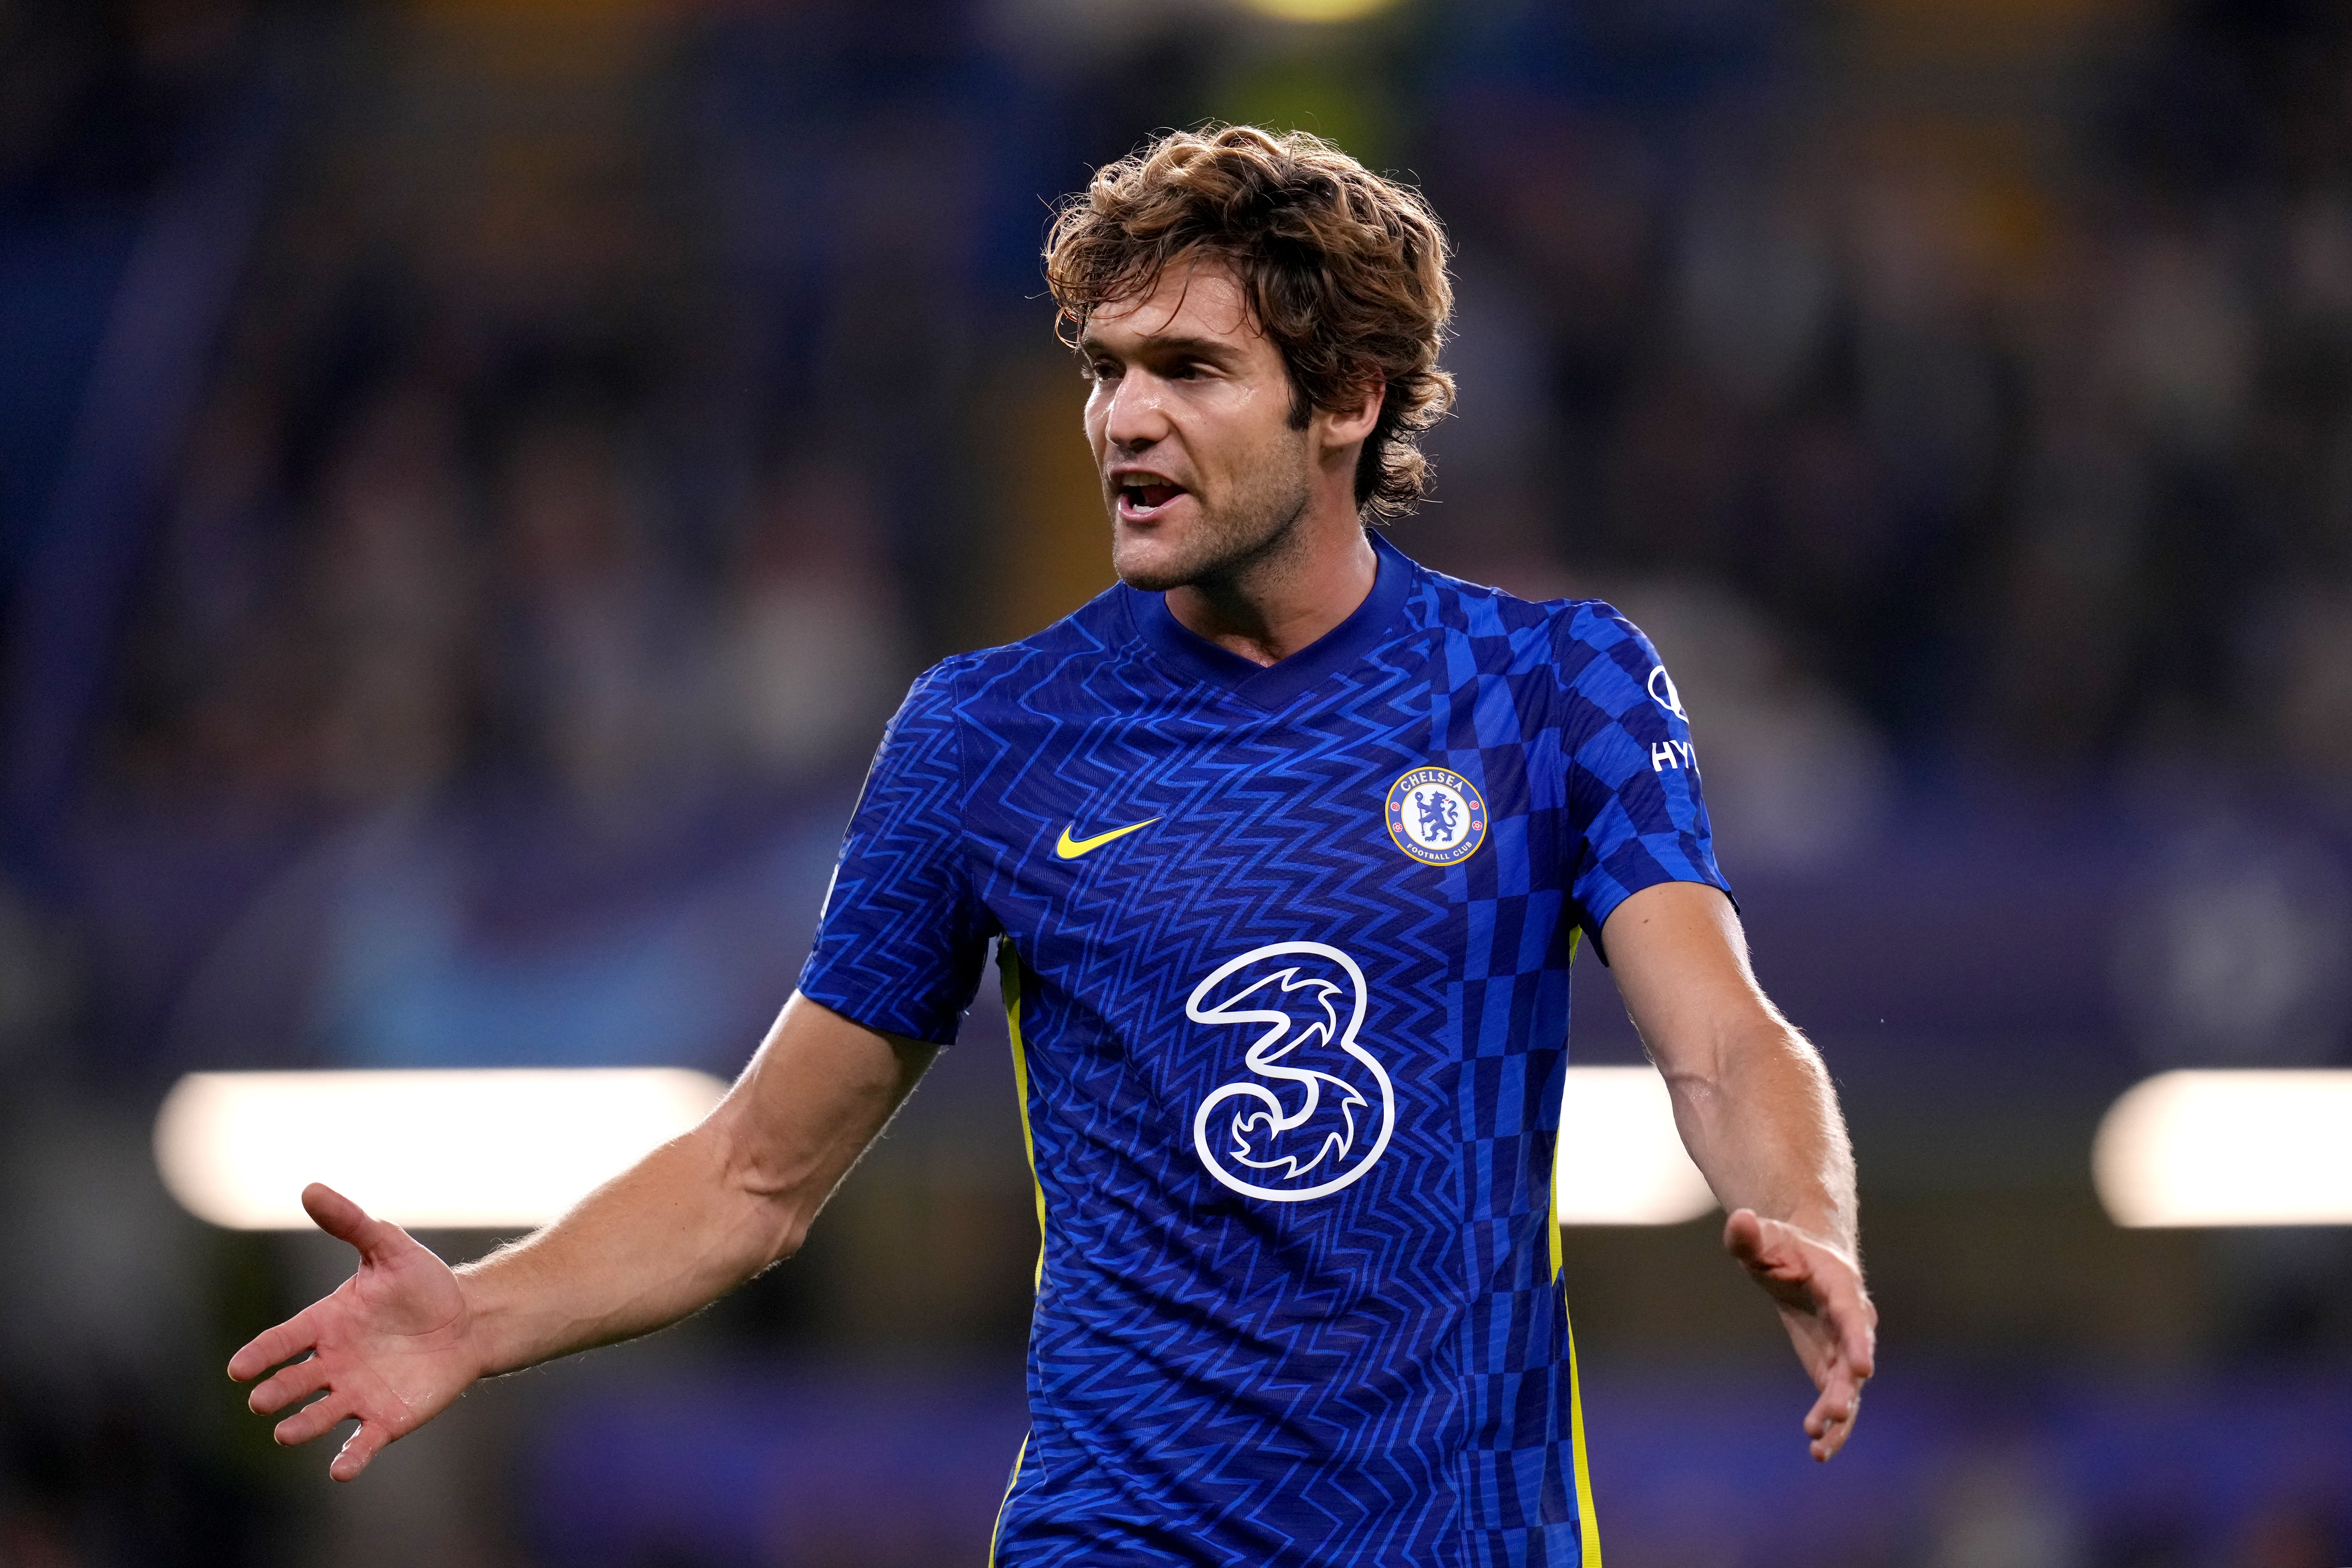 Marcos Alonso, pictured, has been supported by Chelsea over his decision to stop taking the knee